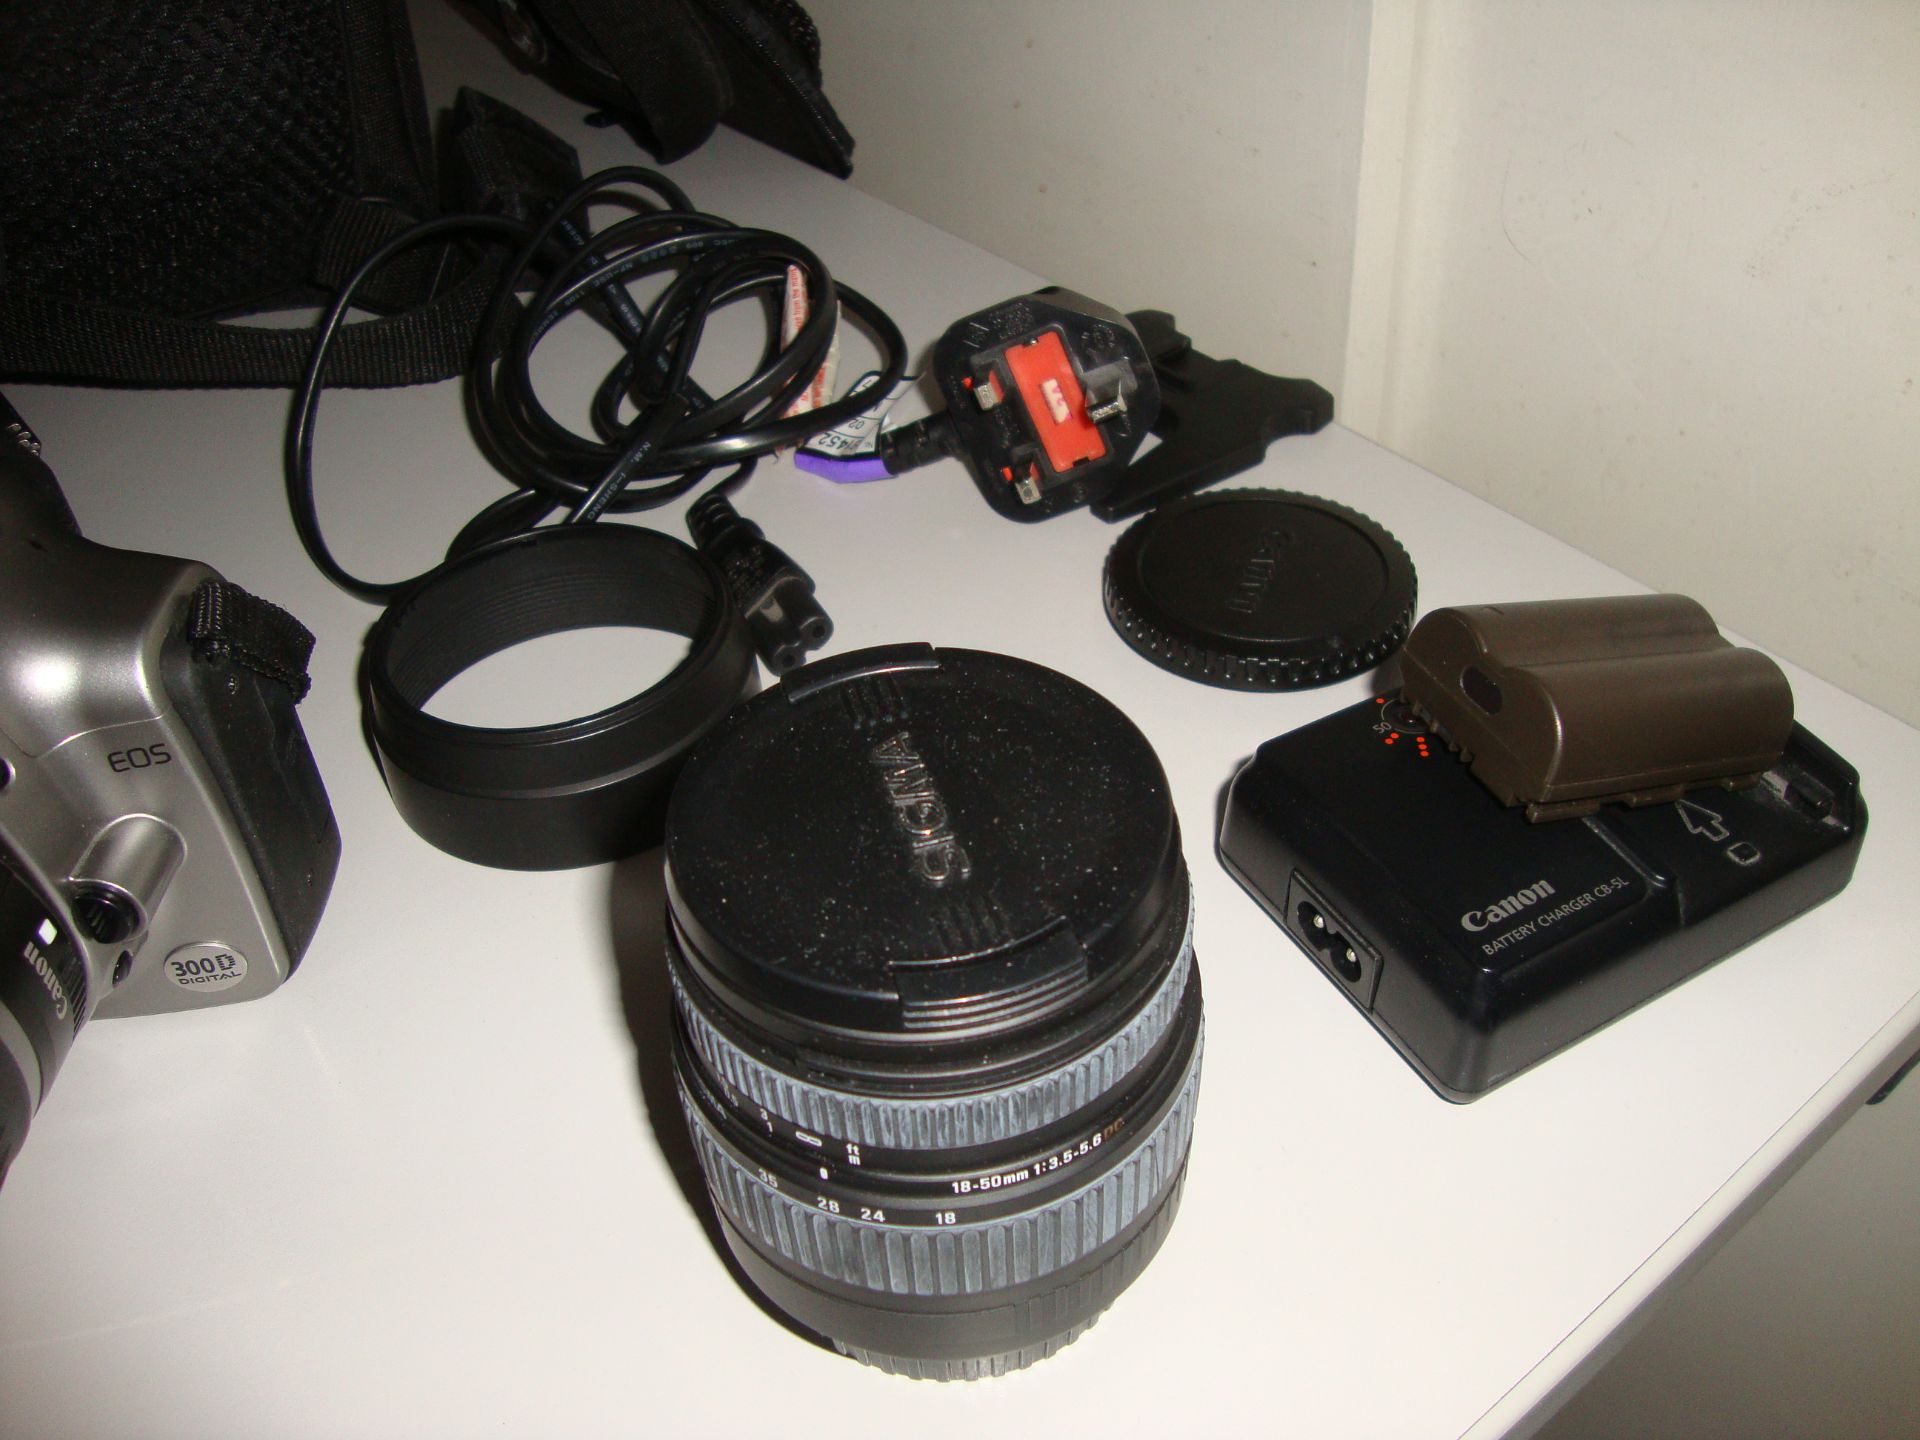 Canon 300D EOS digital SLR camera and lenses - Image 4 of 9